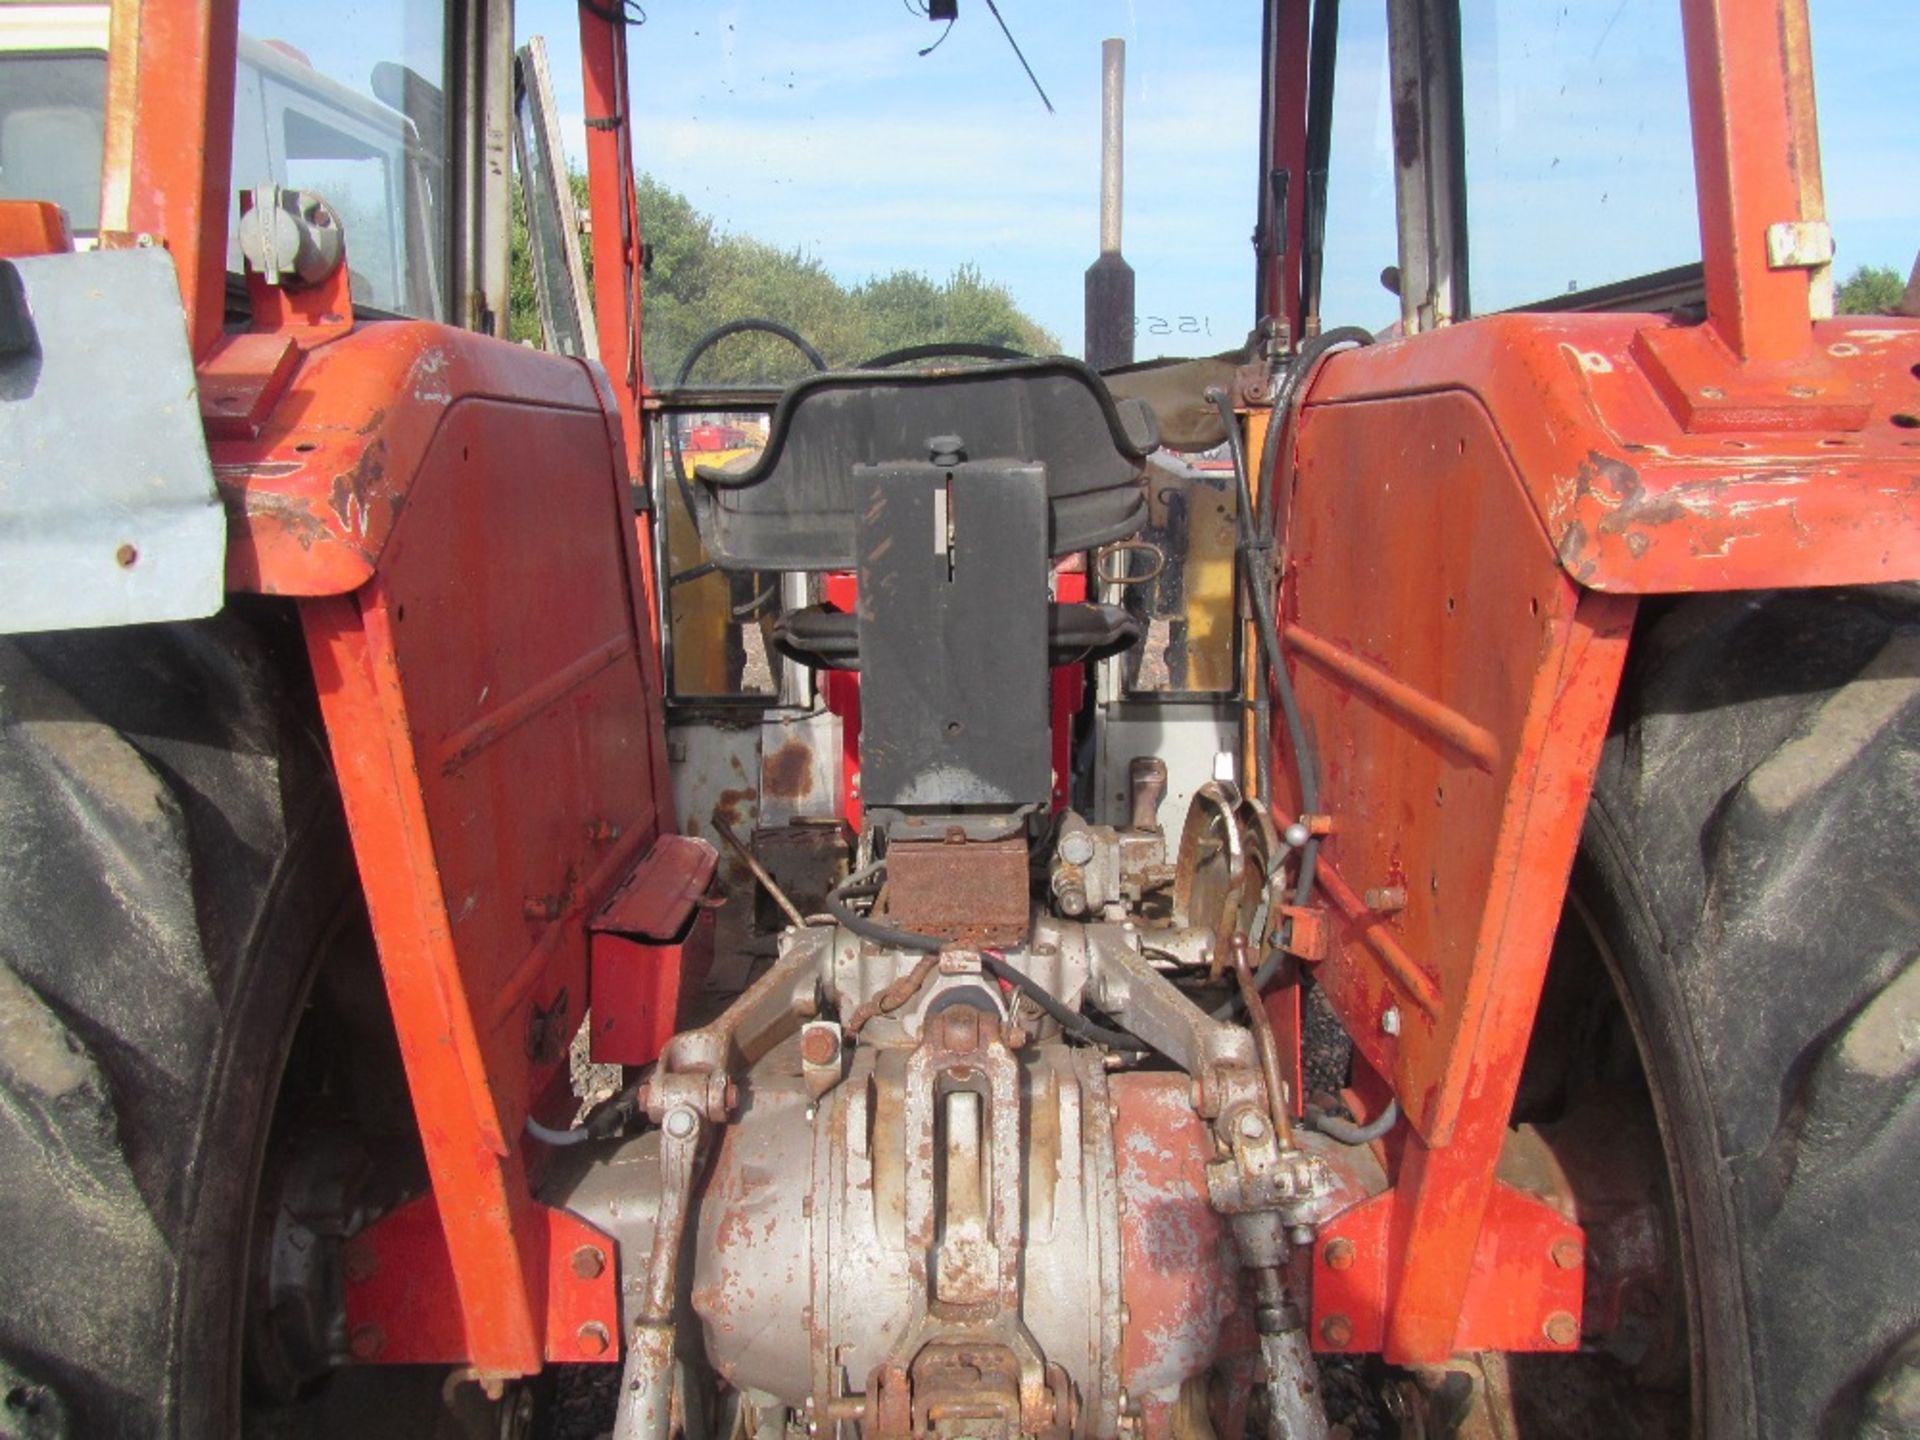 Massey Ferguson 168 4wd Tractor with Loader Ser No 2600115 - Image 4 of 6